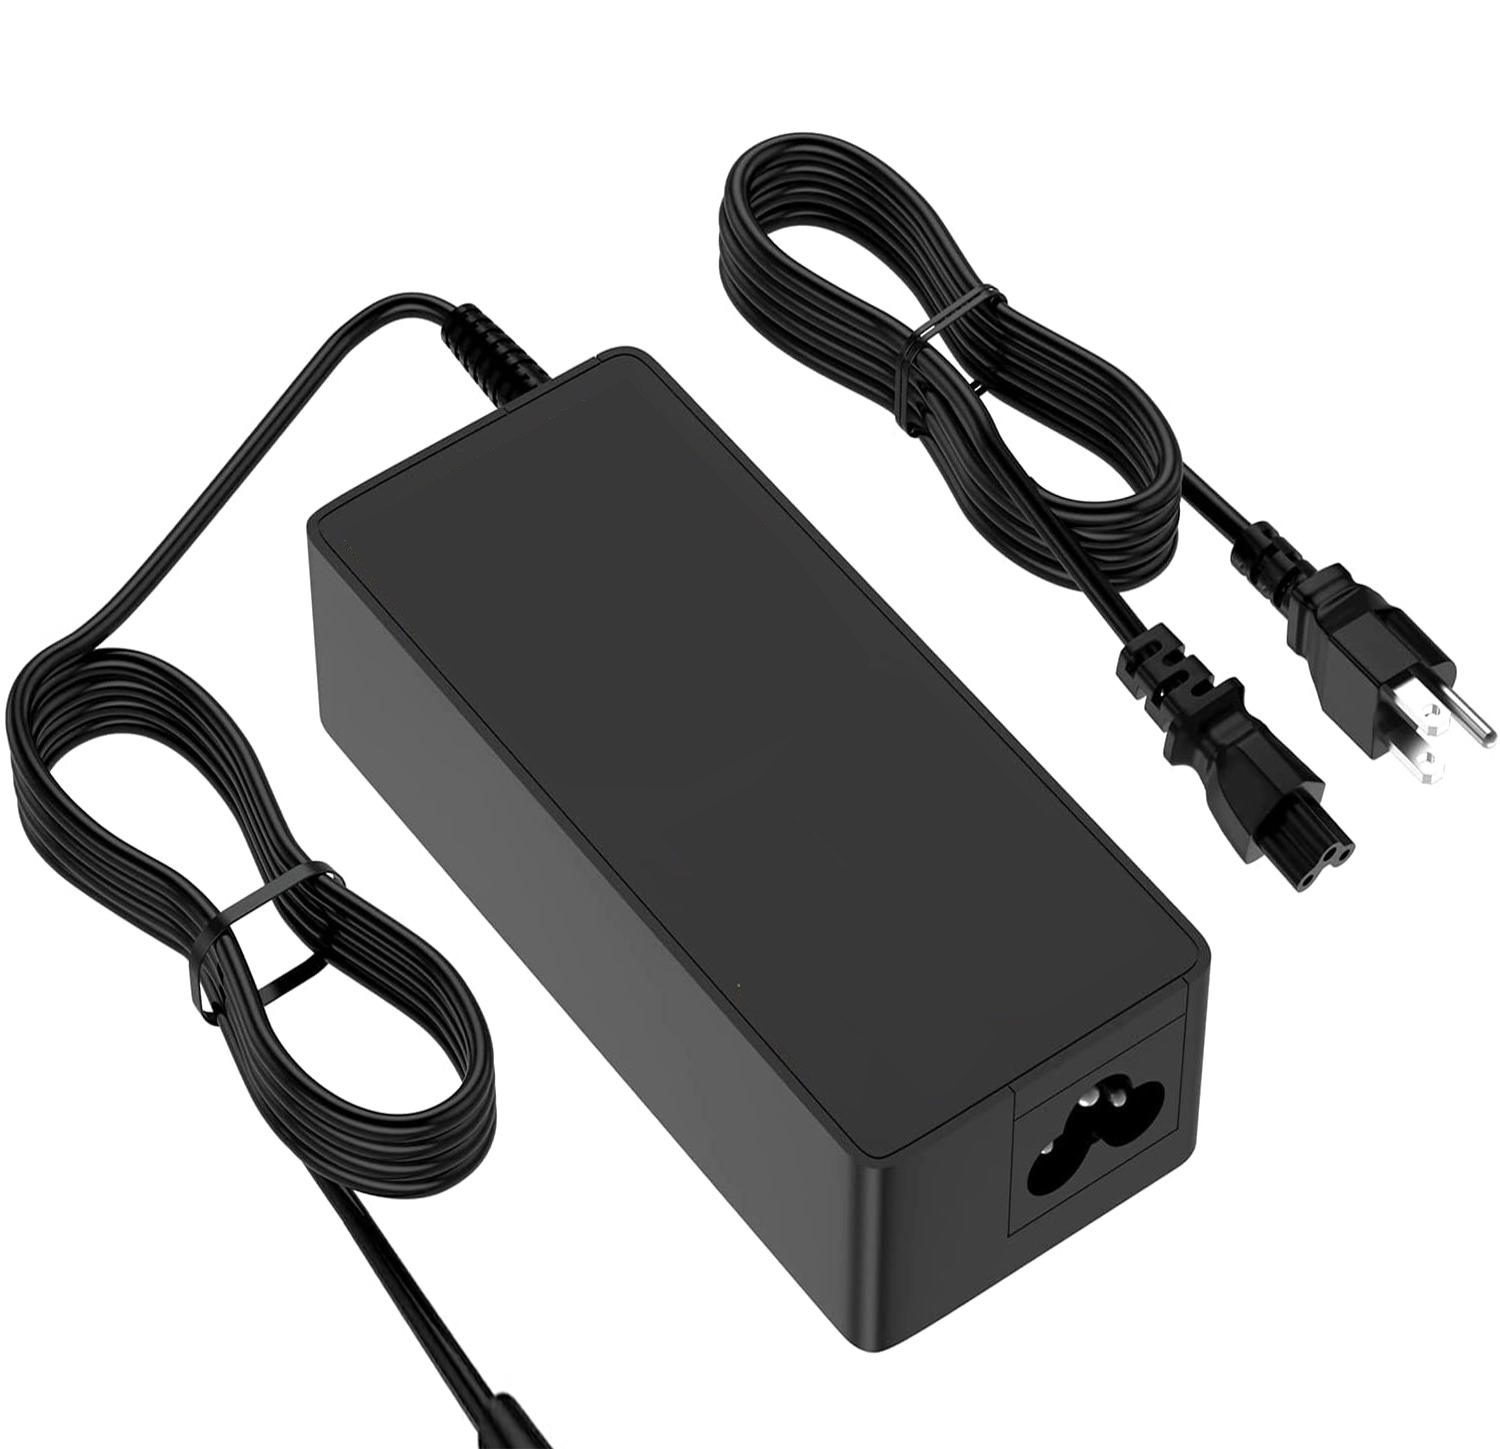 Guy-Tech AC/DC Adapter Compatible with LG 23ET83V 23ET83V-W 10 Point Touch LED IPS Monitor Power Supply Cord Cable PS Charger - image 1 of 5